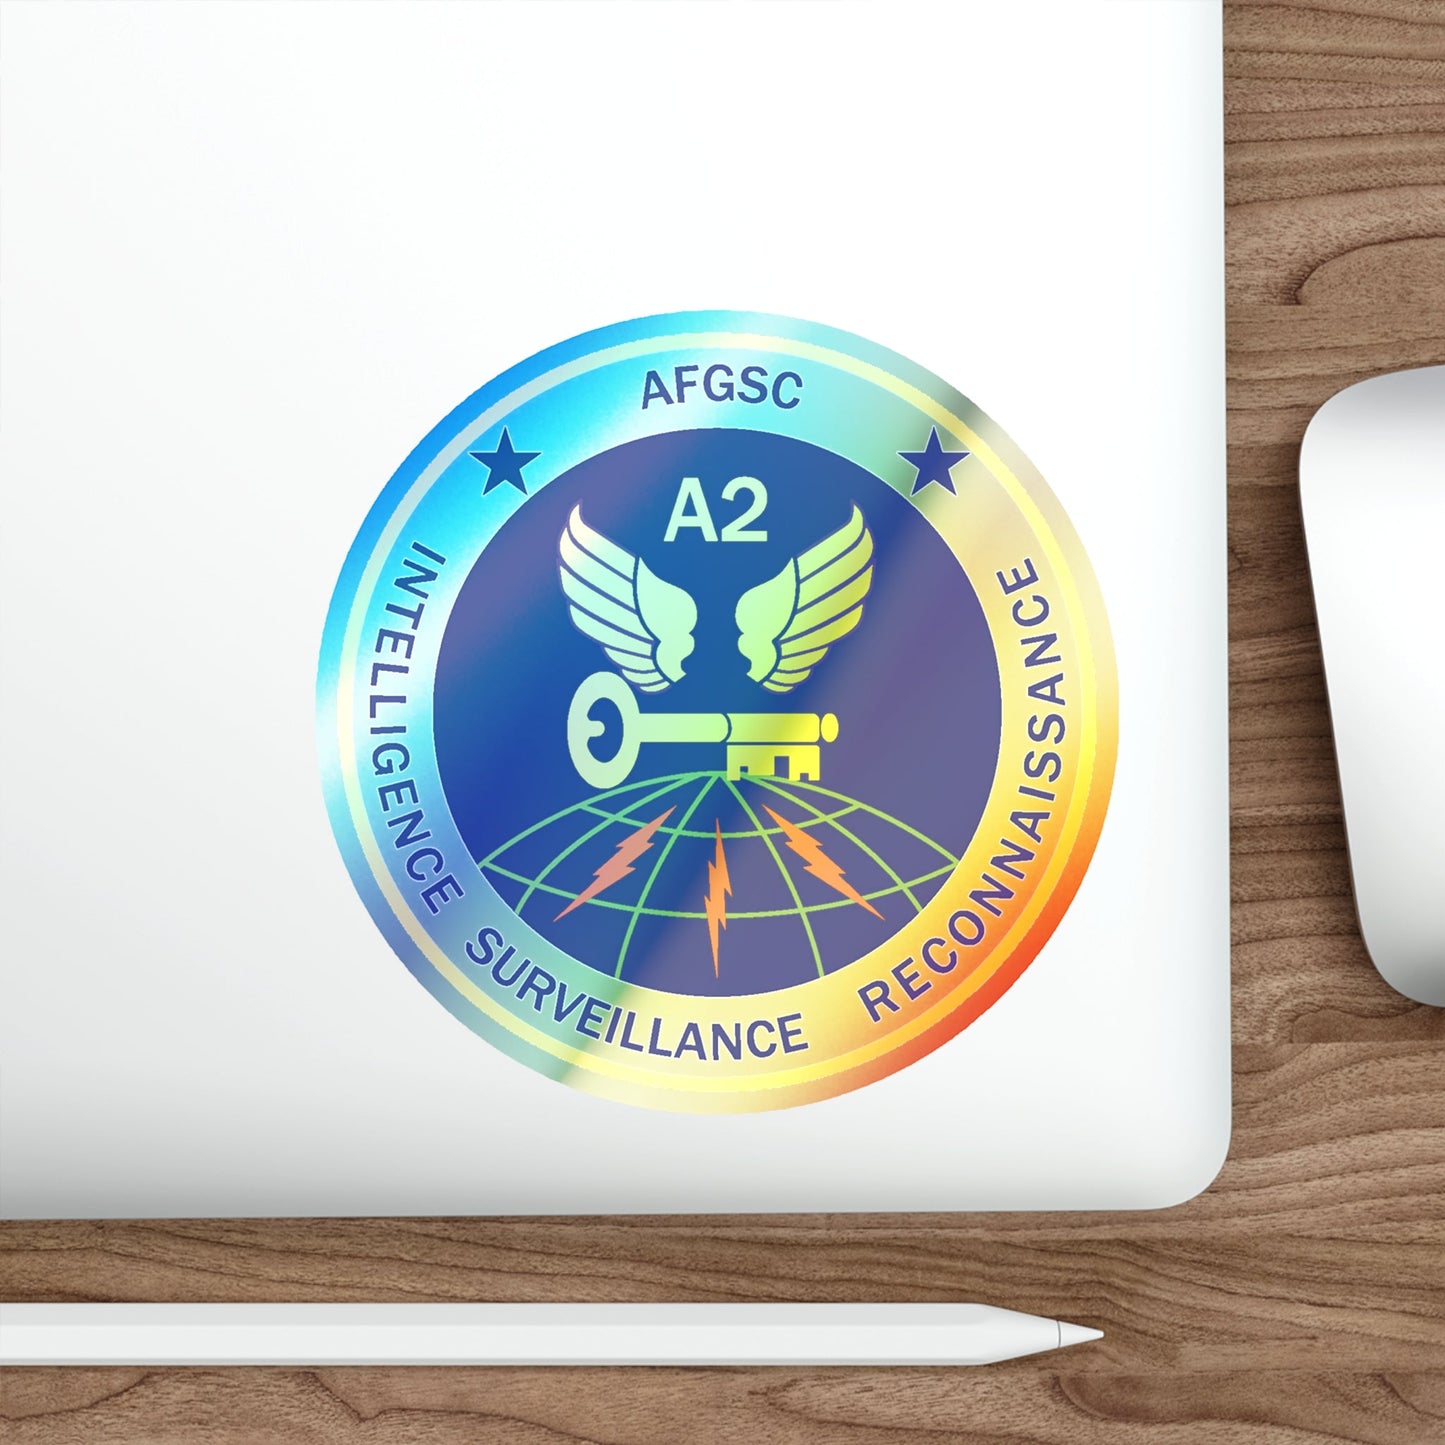 AFGSC A2 (U.S. Air Force) Holographic STICKER Die-Cut Vinyl Decal-The Sticker Space